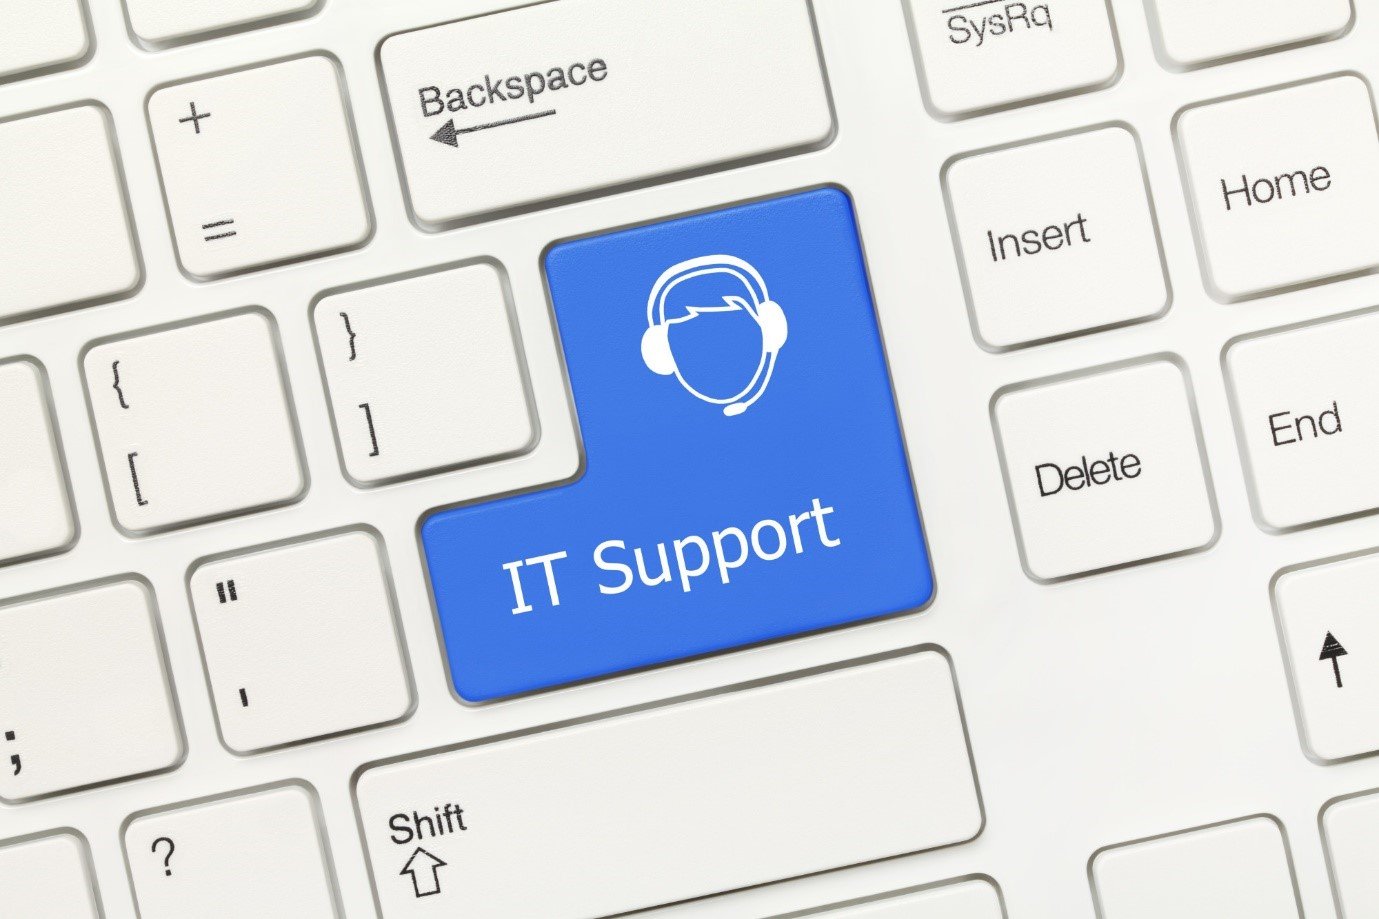 IT Support Company